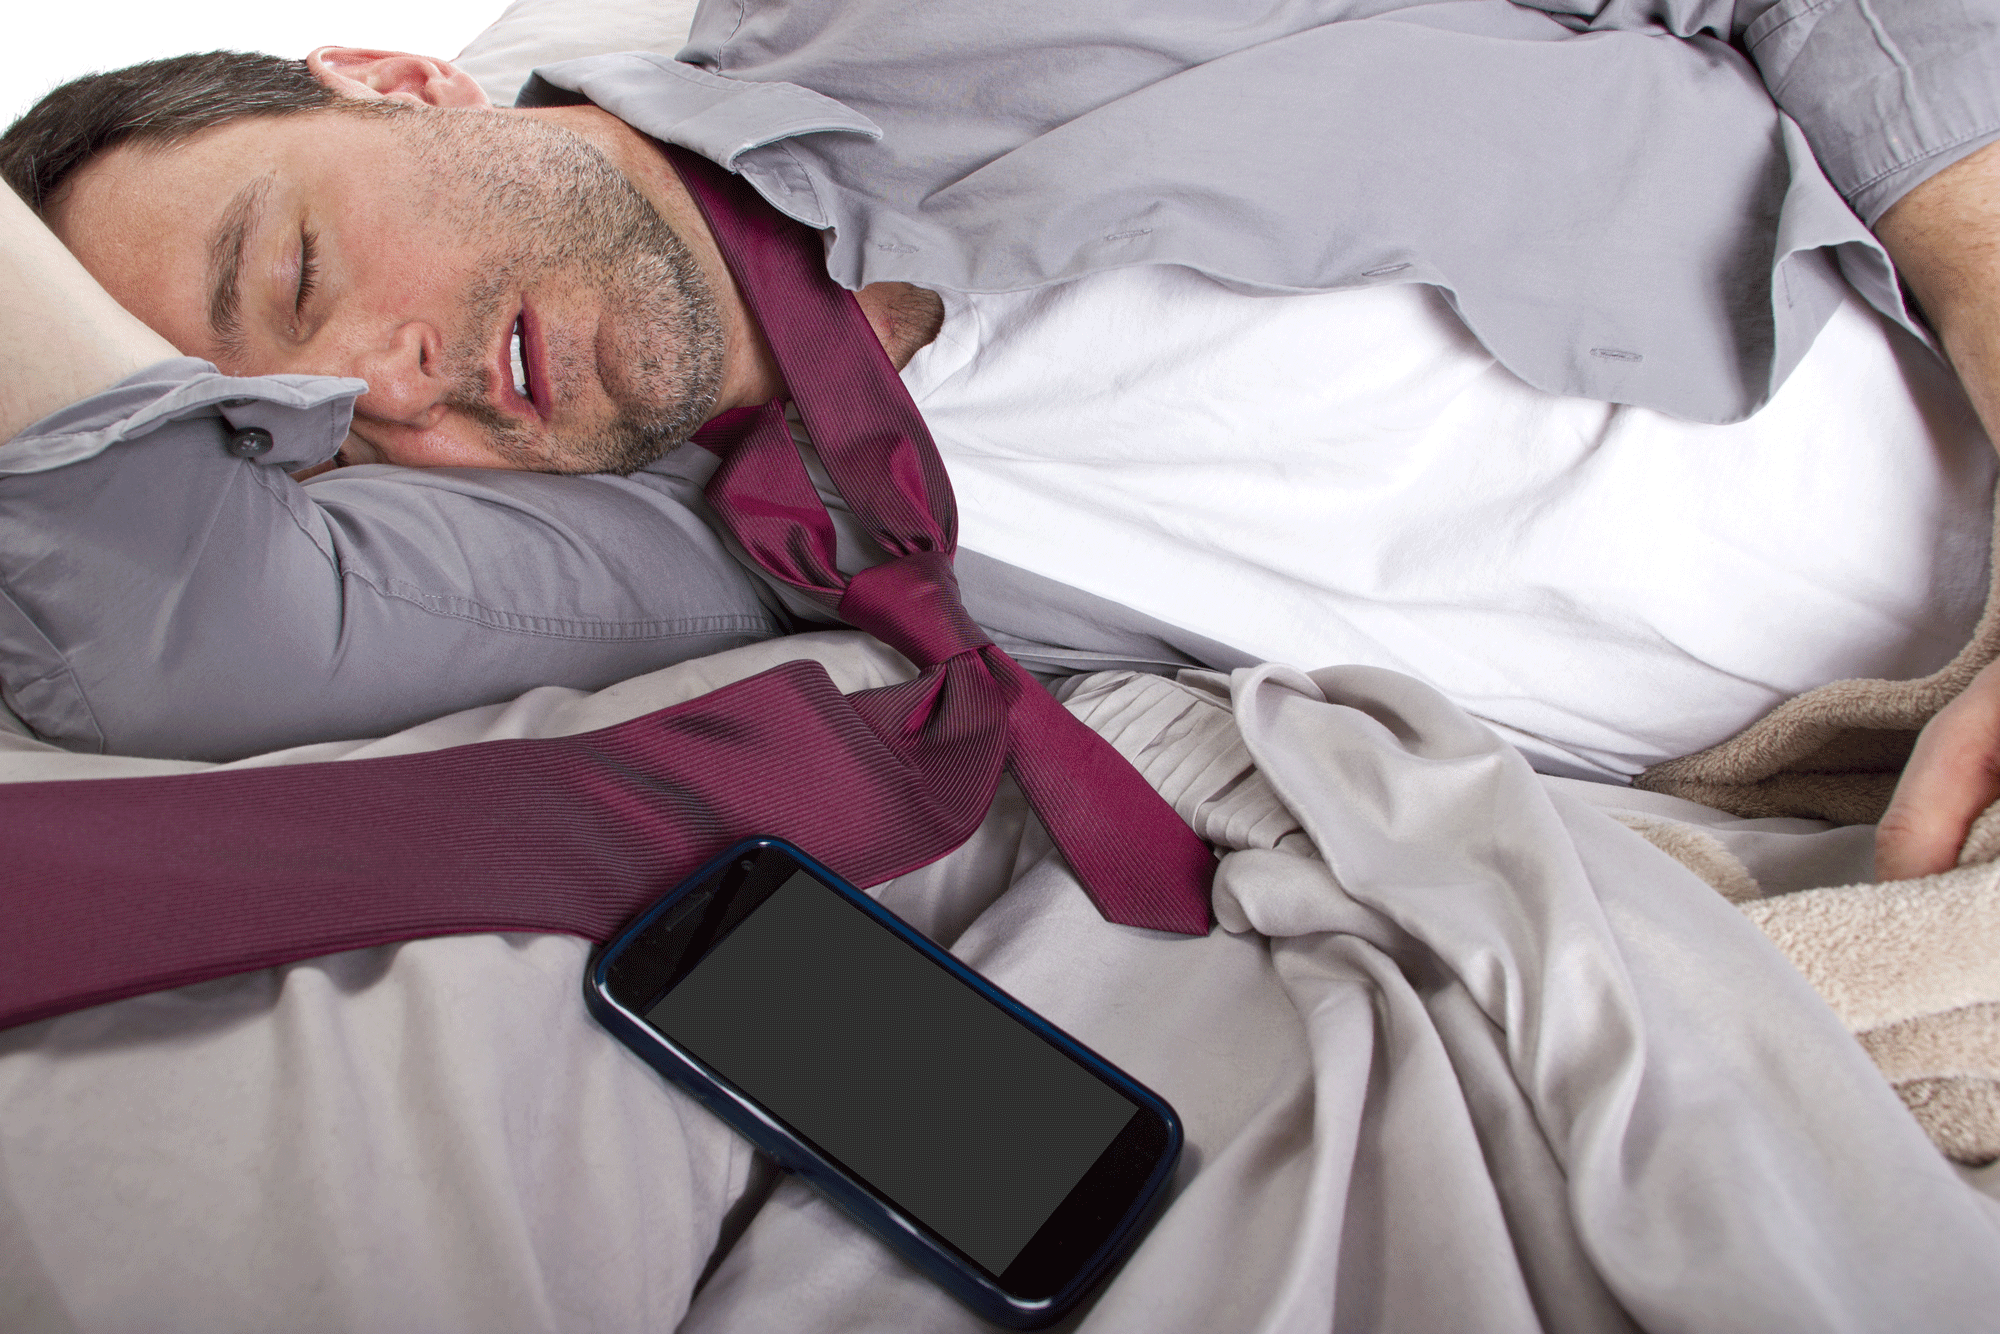 A man in an open shirt and loosened tie sleeps as his phone gives an alert that Friday is part of the weekend.